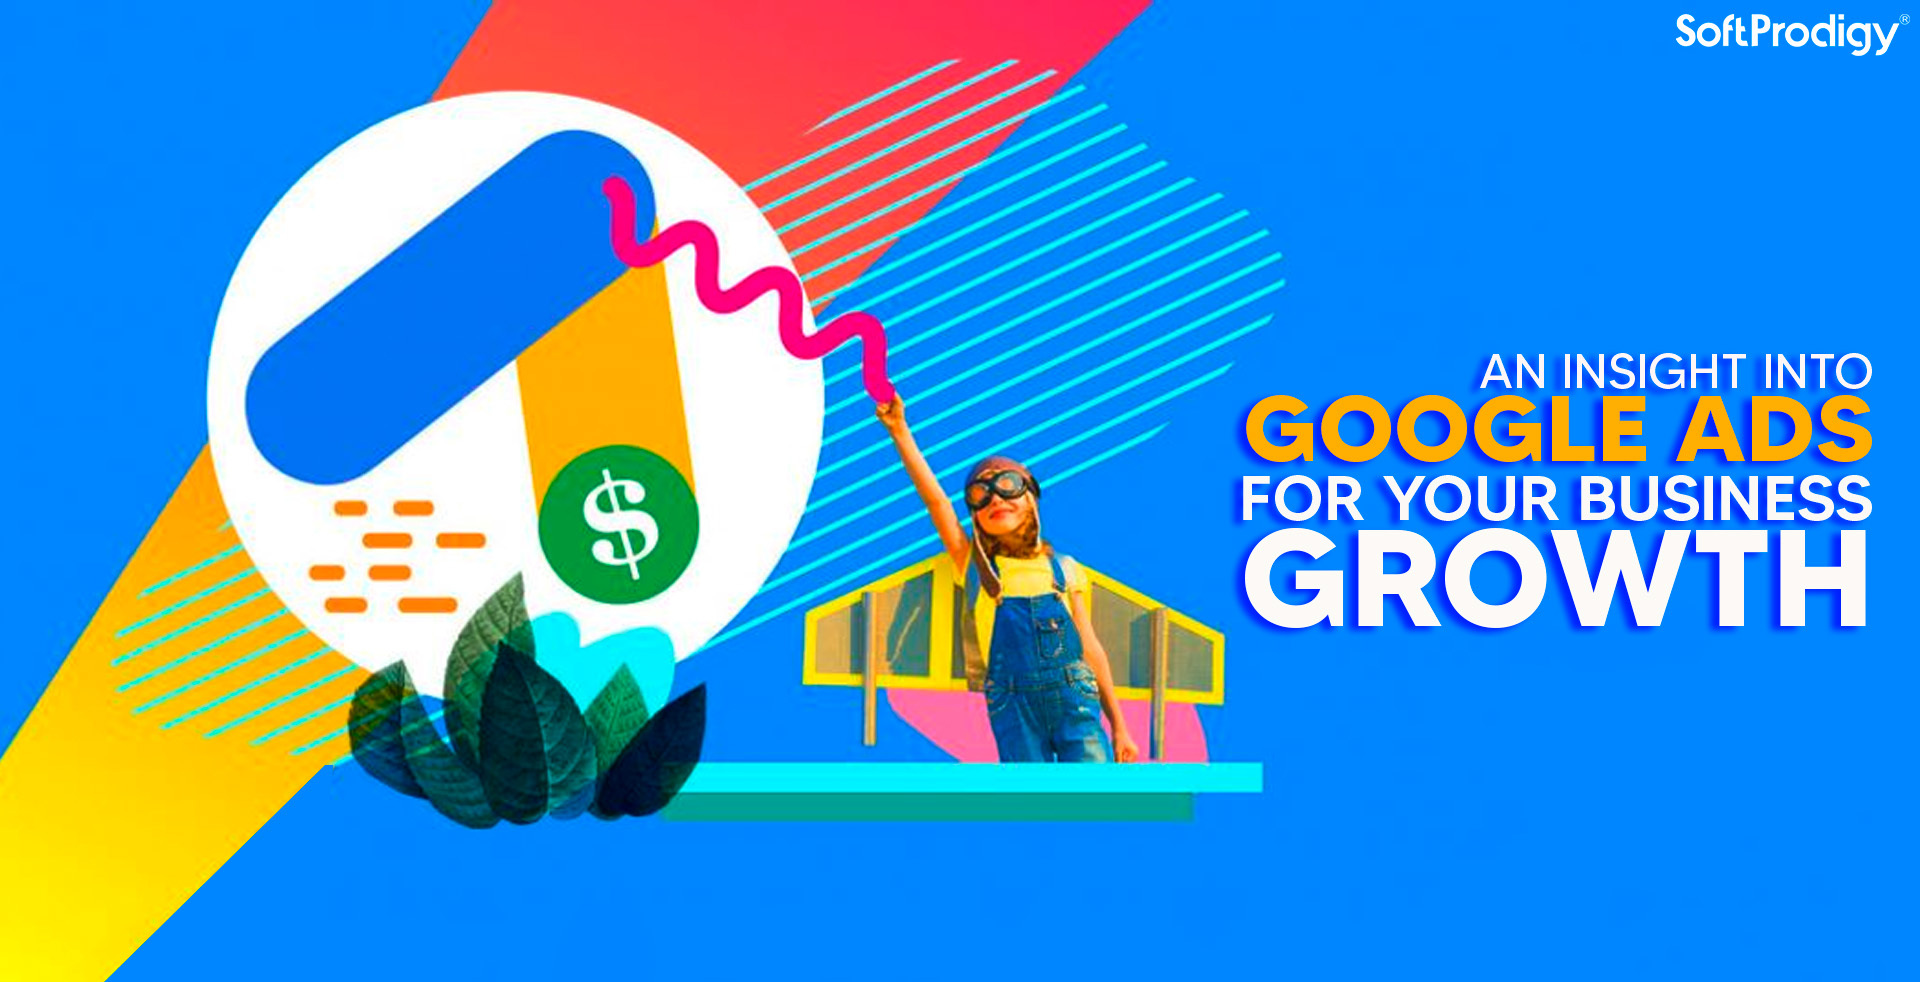 Google-Ads-for-Business-Growth